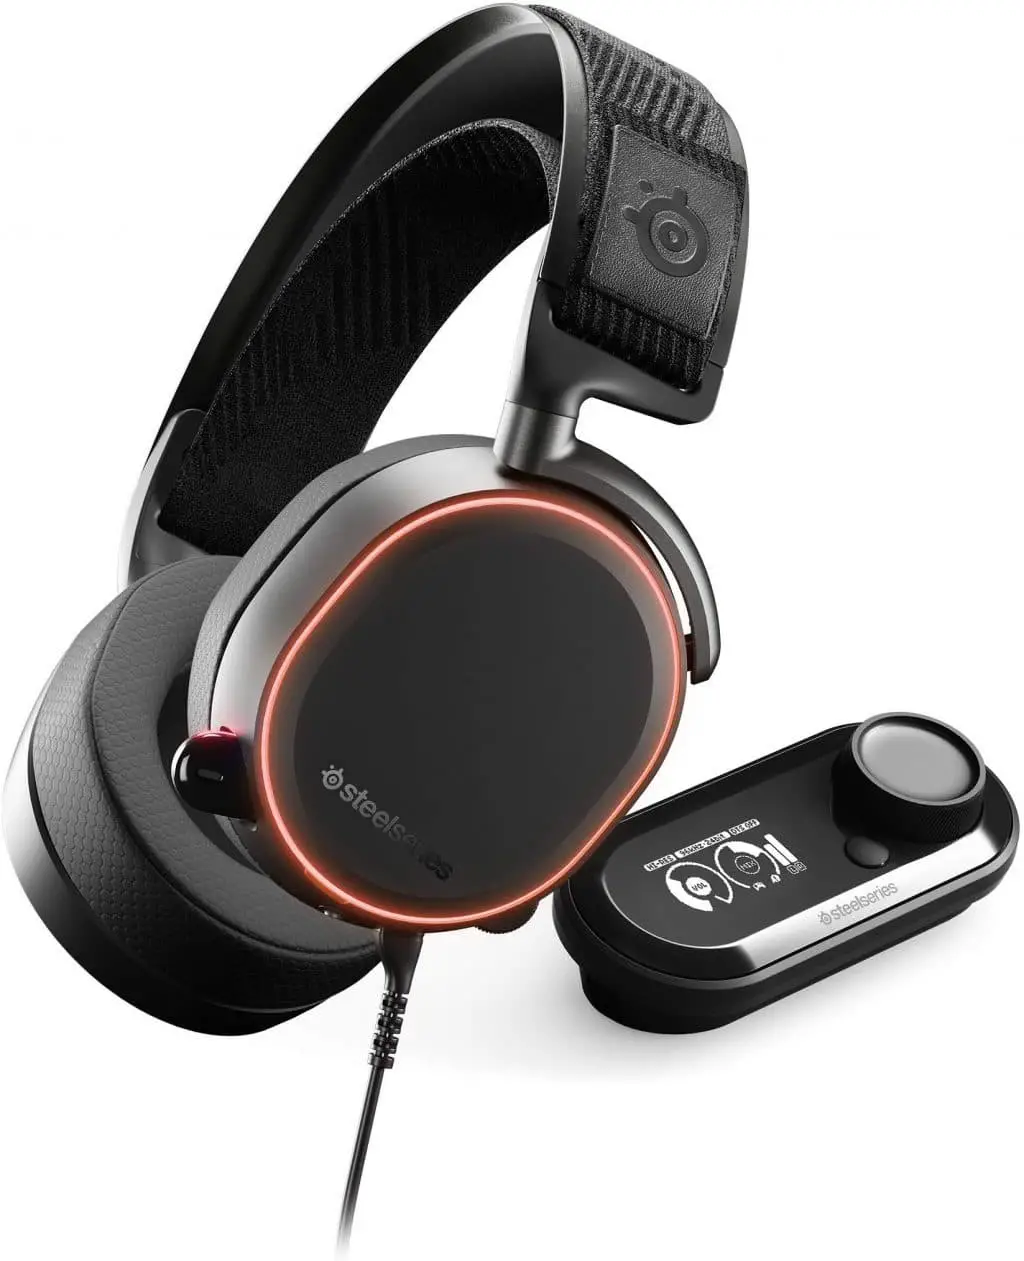 Gaming Headset Black Friday 2019 Deals